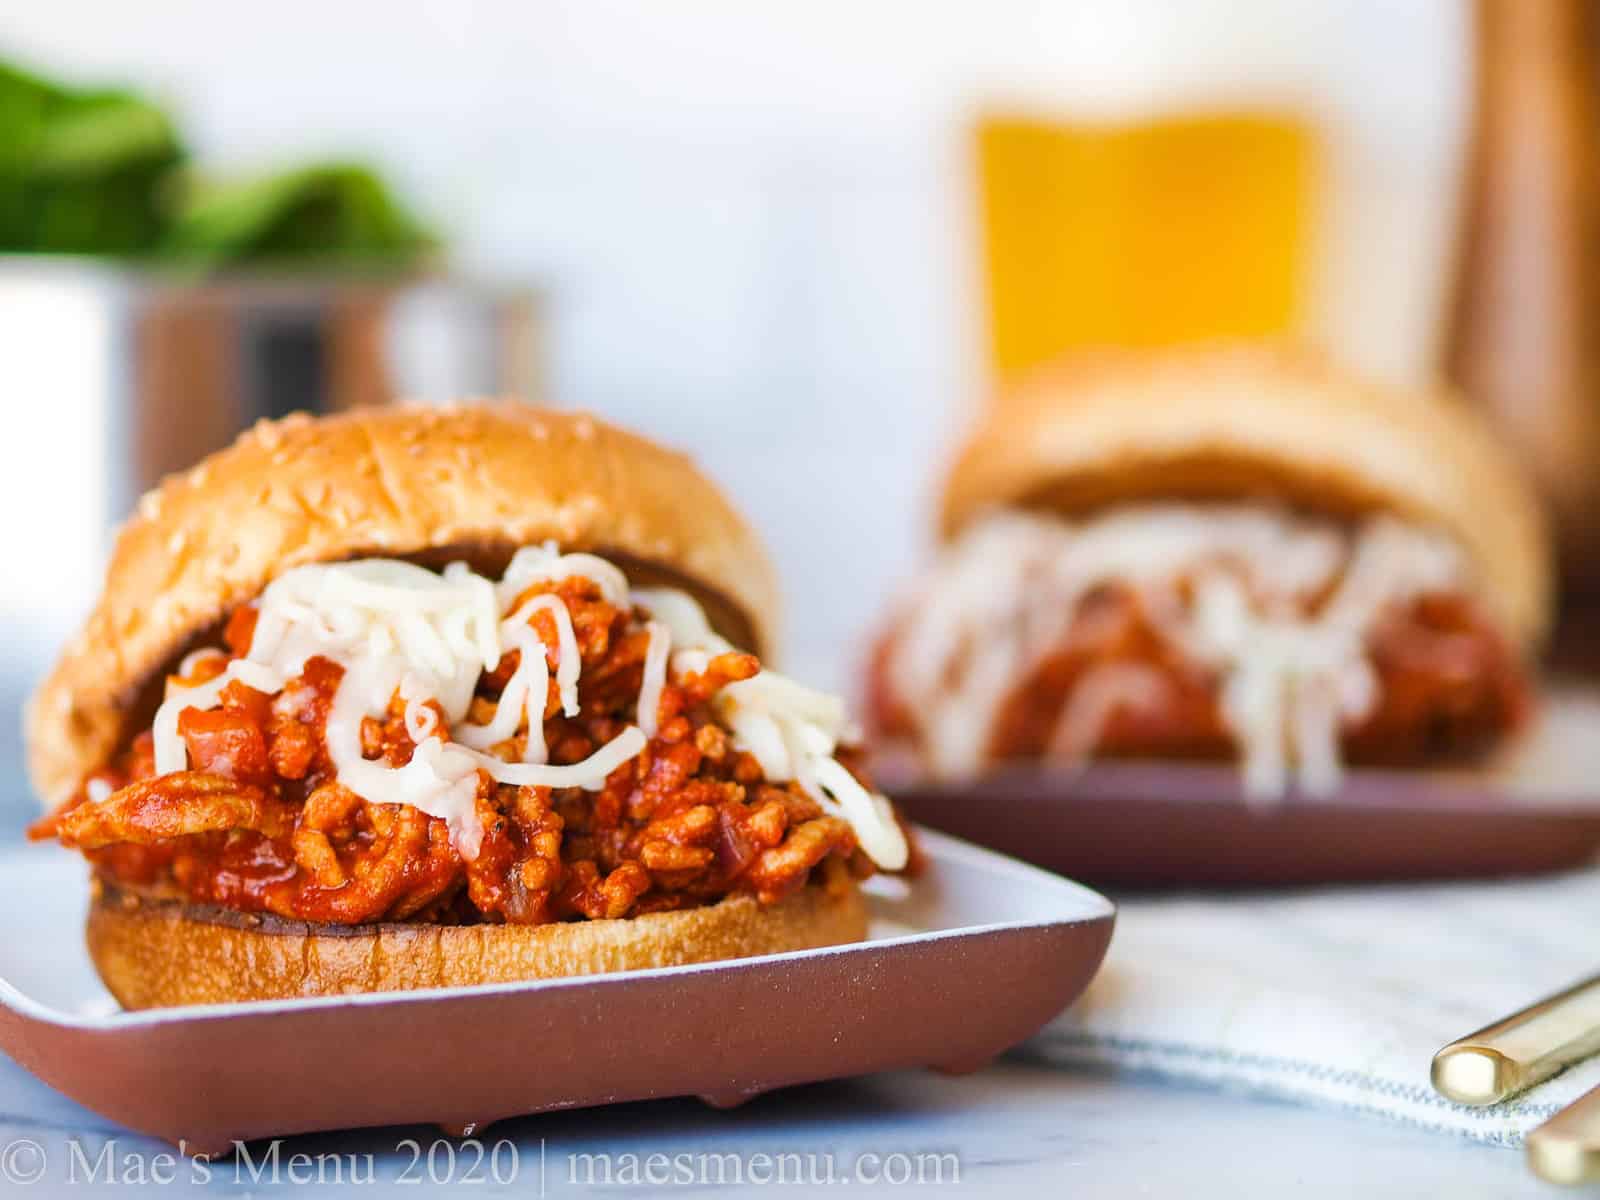 Two plates of sloppy joes on a dish towel with a pepper mill, a glass of beer, and a dish of salad in the background.